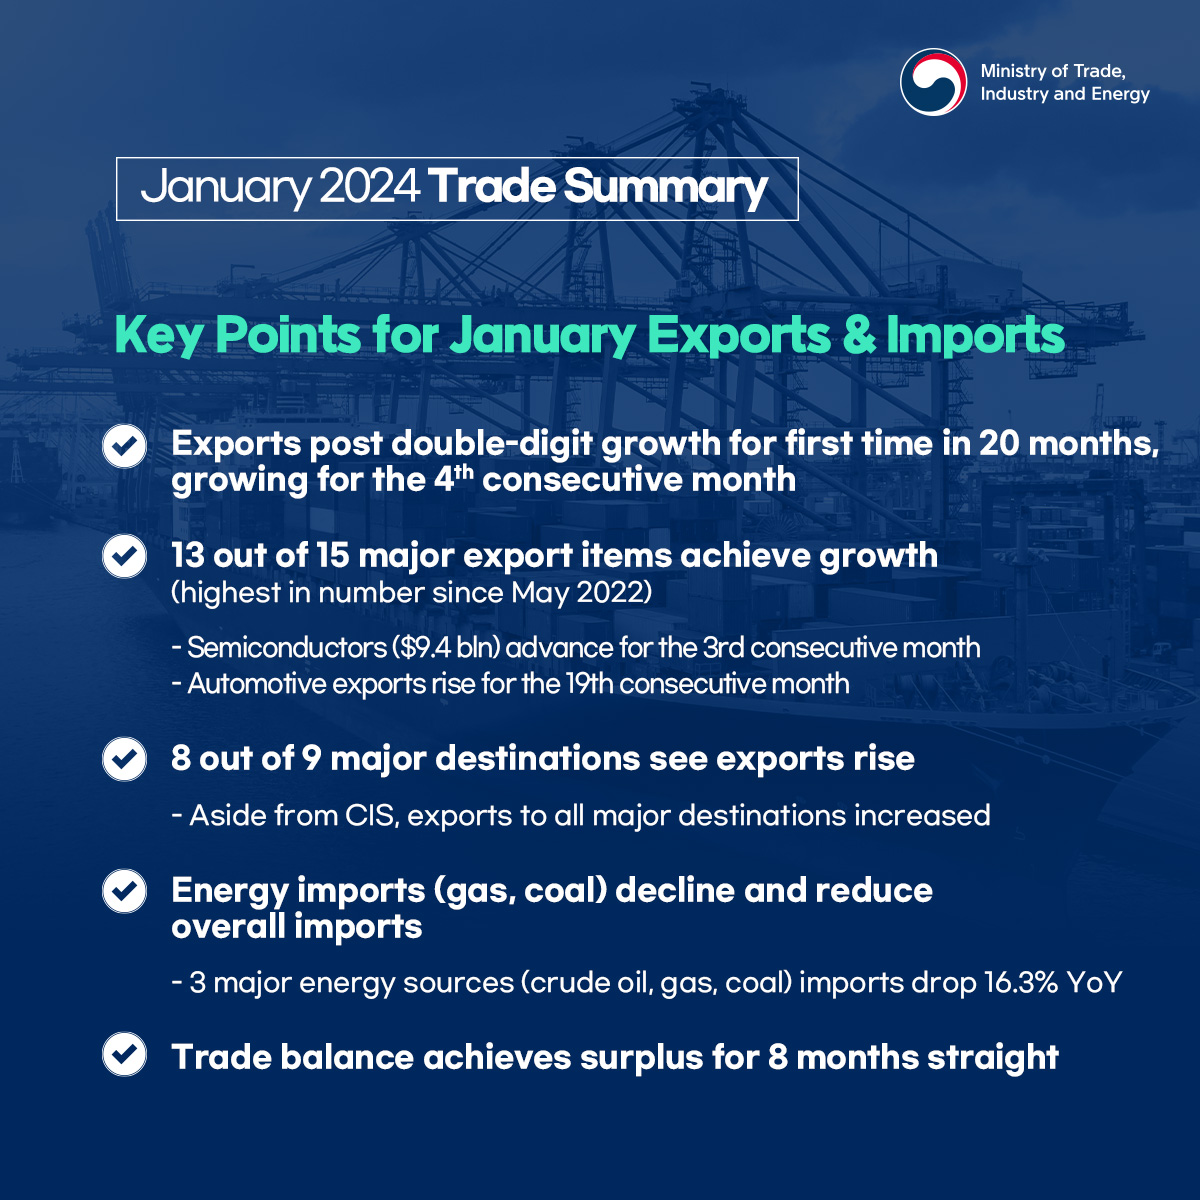 Ministry of Trade, Industry and Energy
January 2024 Trade Summary
Key Points for January Exports & Imports
Exports post double-digit growth for first time in 20 months, growing for the 4th consecutive month
13 out of 15 major export items achieve growth (highest in number since May 2022)
- Semiconductors ($9.4 bln) advance for the 3rd consecutive month
- Automotive exports rise for the 19th consecutive month
8 out of 9 major destinations see exports rise
- Aside from CIS, exports to all major destinations increased
Energy imports (gas, coal) decline and reduce overall imports
- 3 major energy sources (crude oil, gas, coal) imports drop 16.3% YoY
Trade balance achieves surplus for 8 months straight
